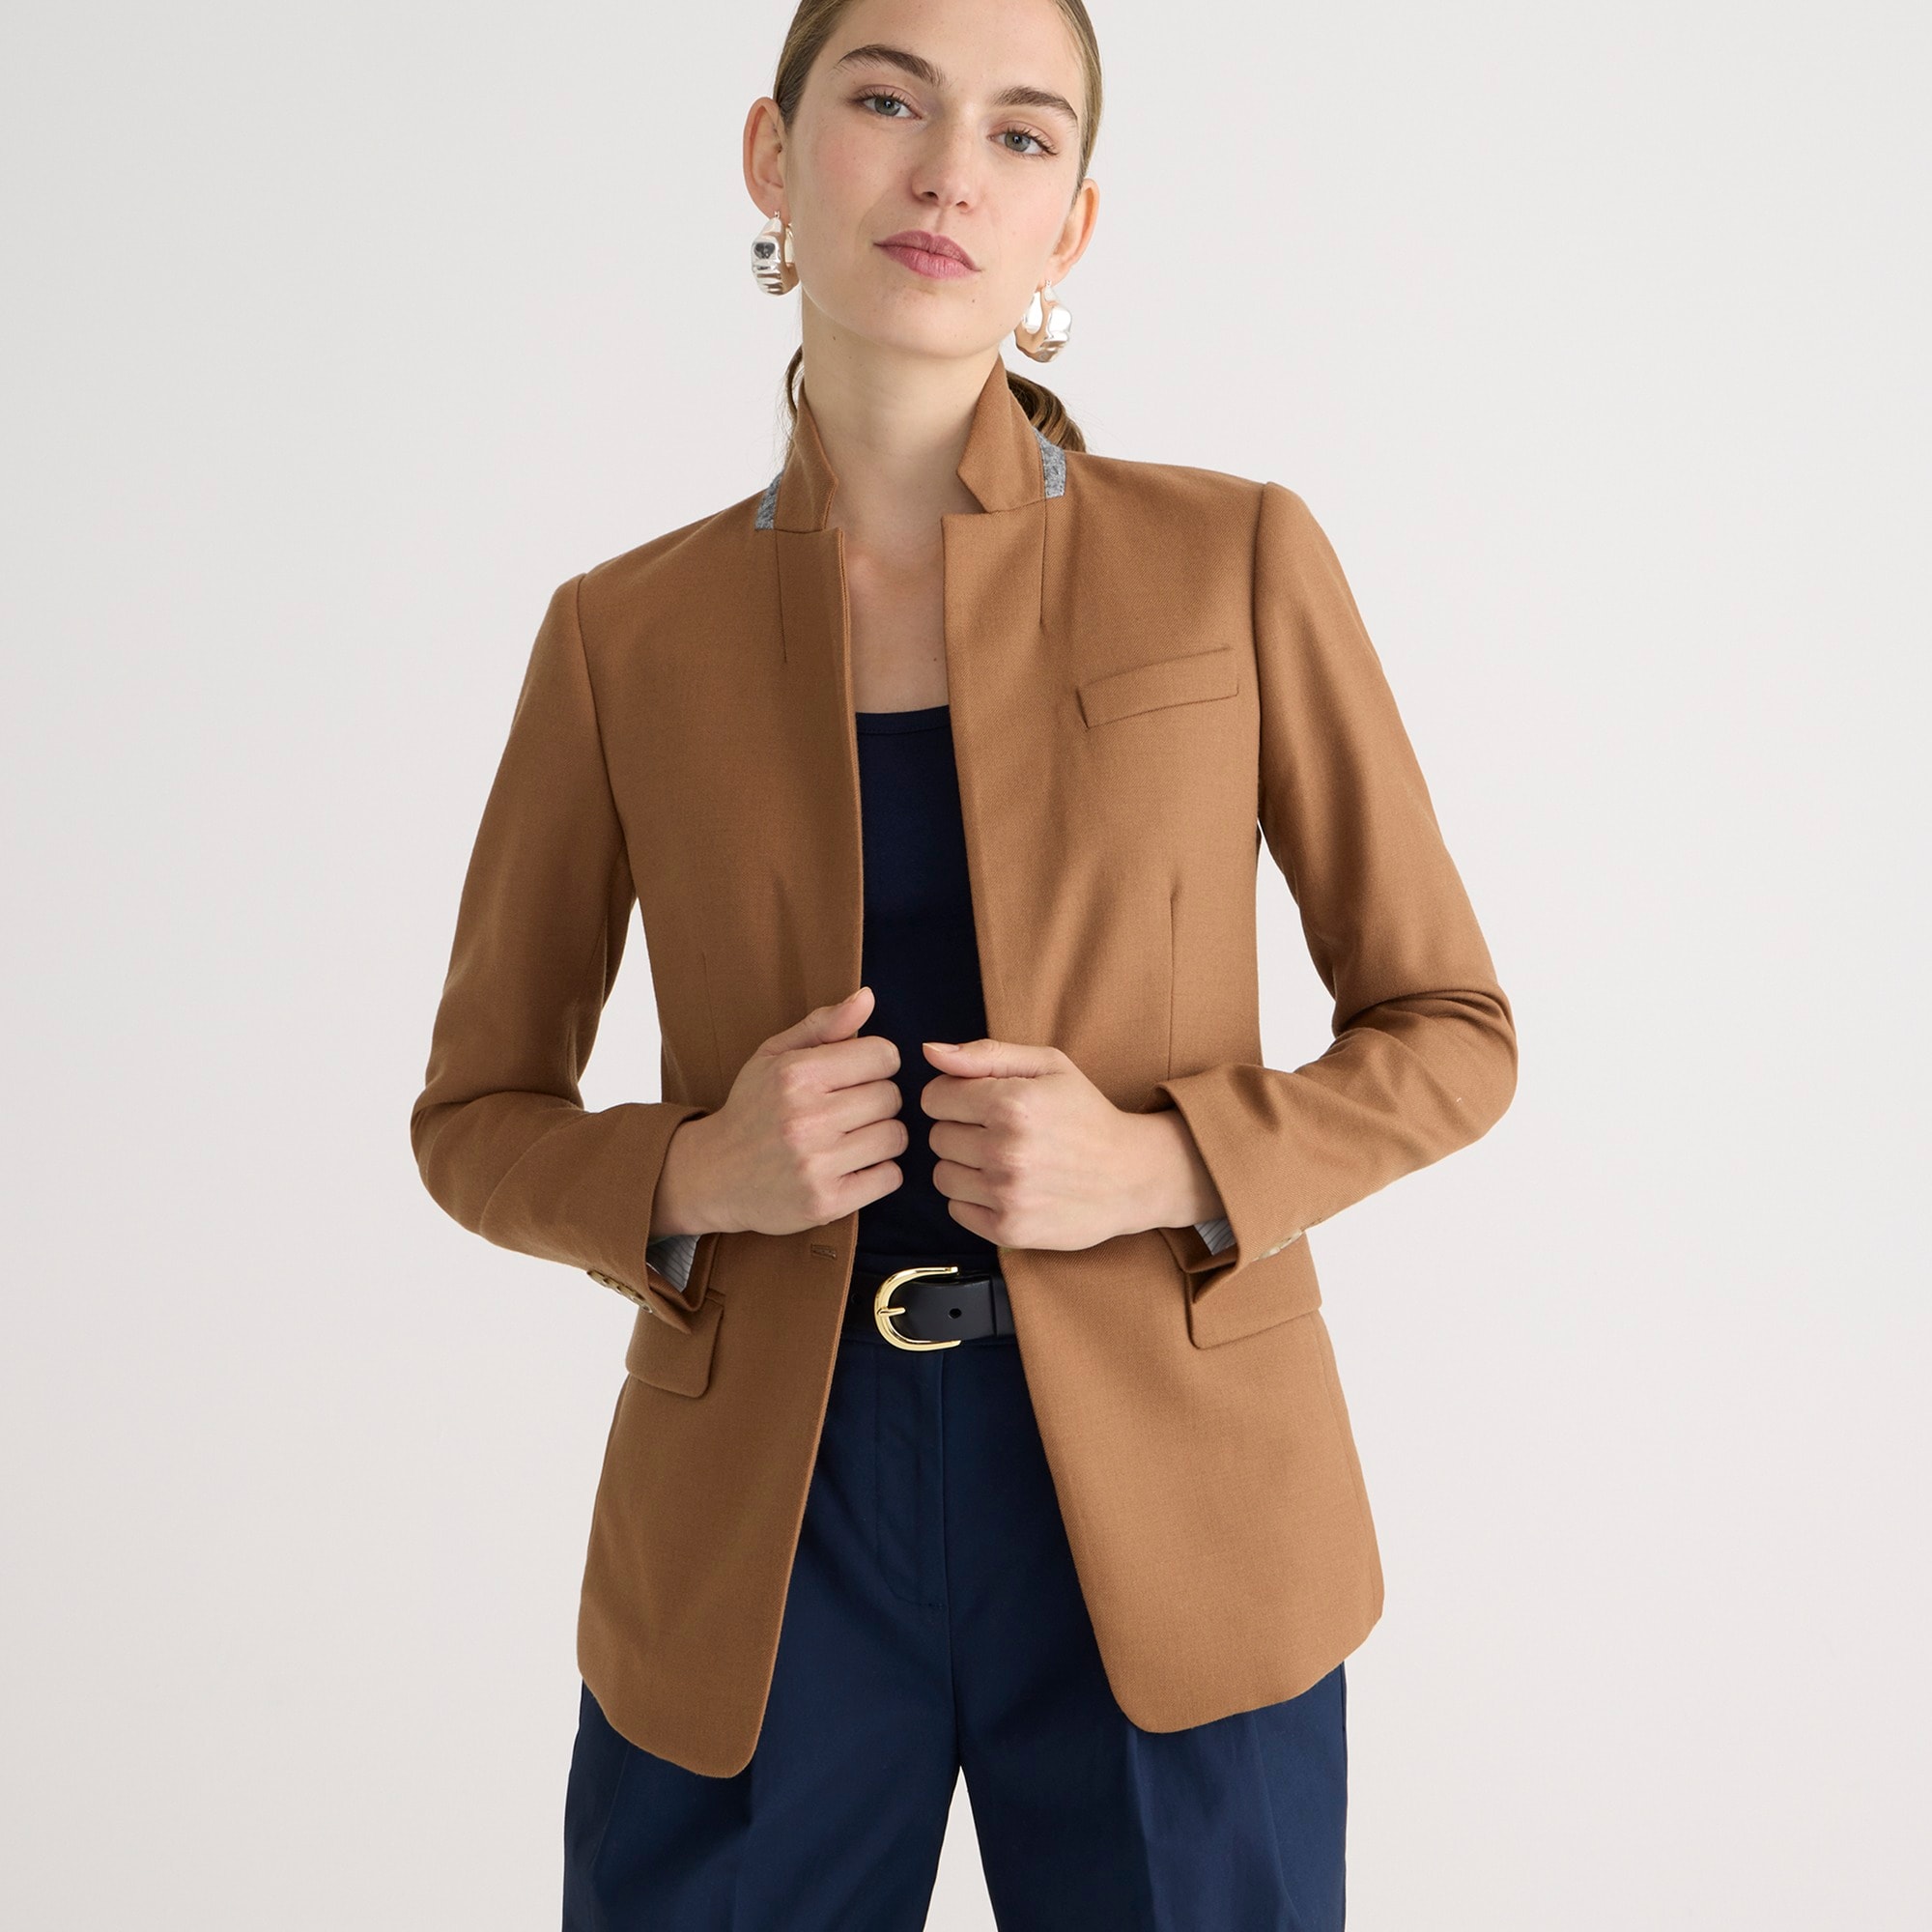 Shop 11 of the Best Tweed Jackets for Women